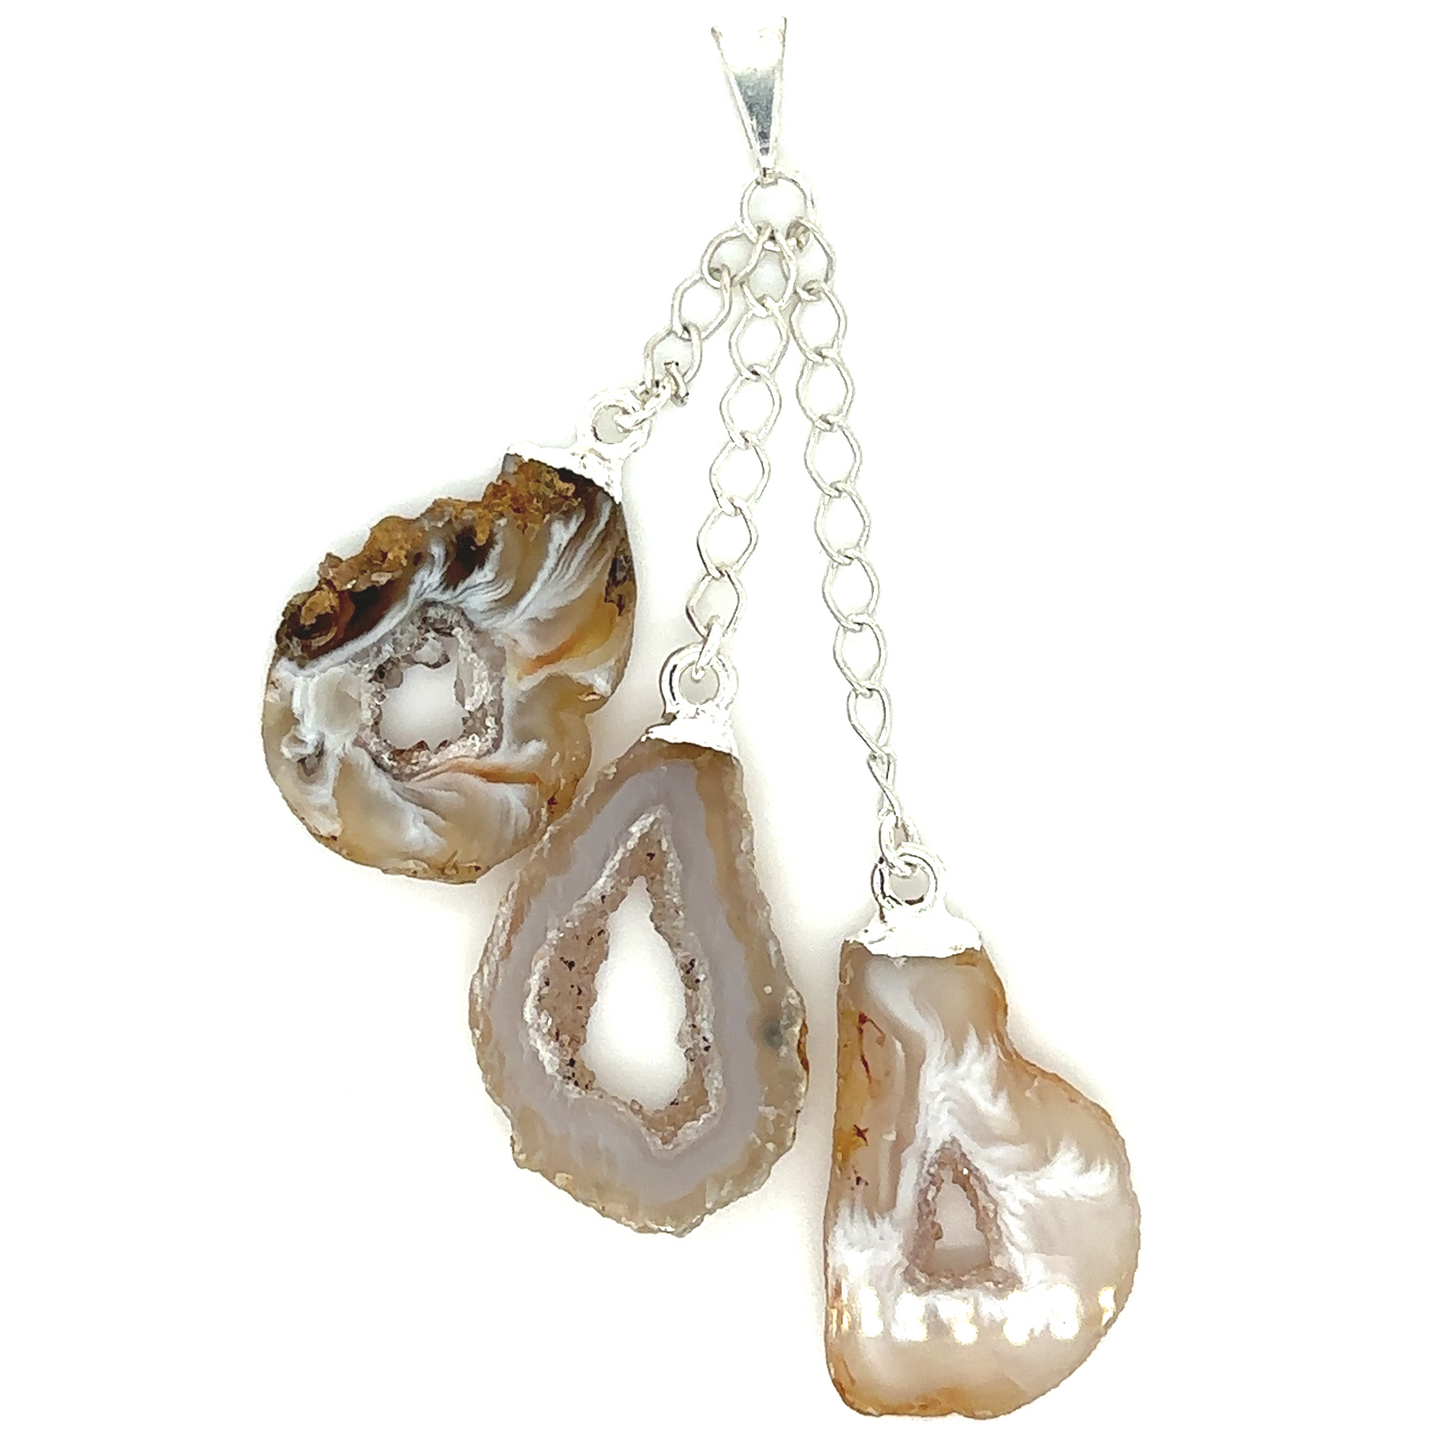 A trio of Super Silver crystal geode pendant agate pendants on a chain, showcasing their natural beauty in an earthy style.